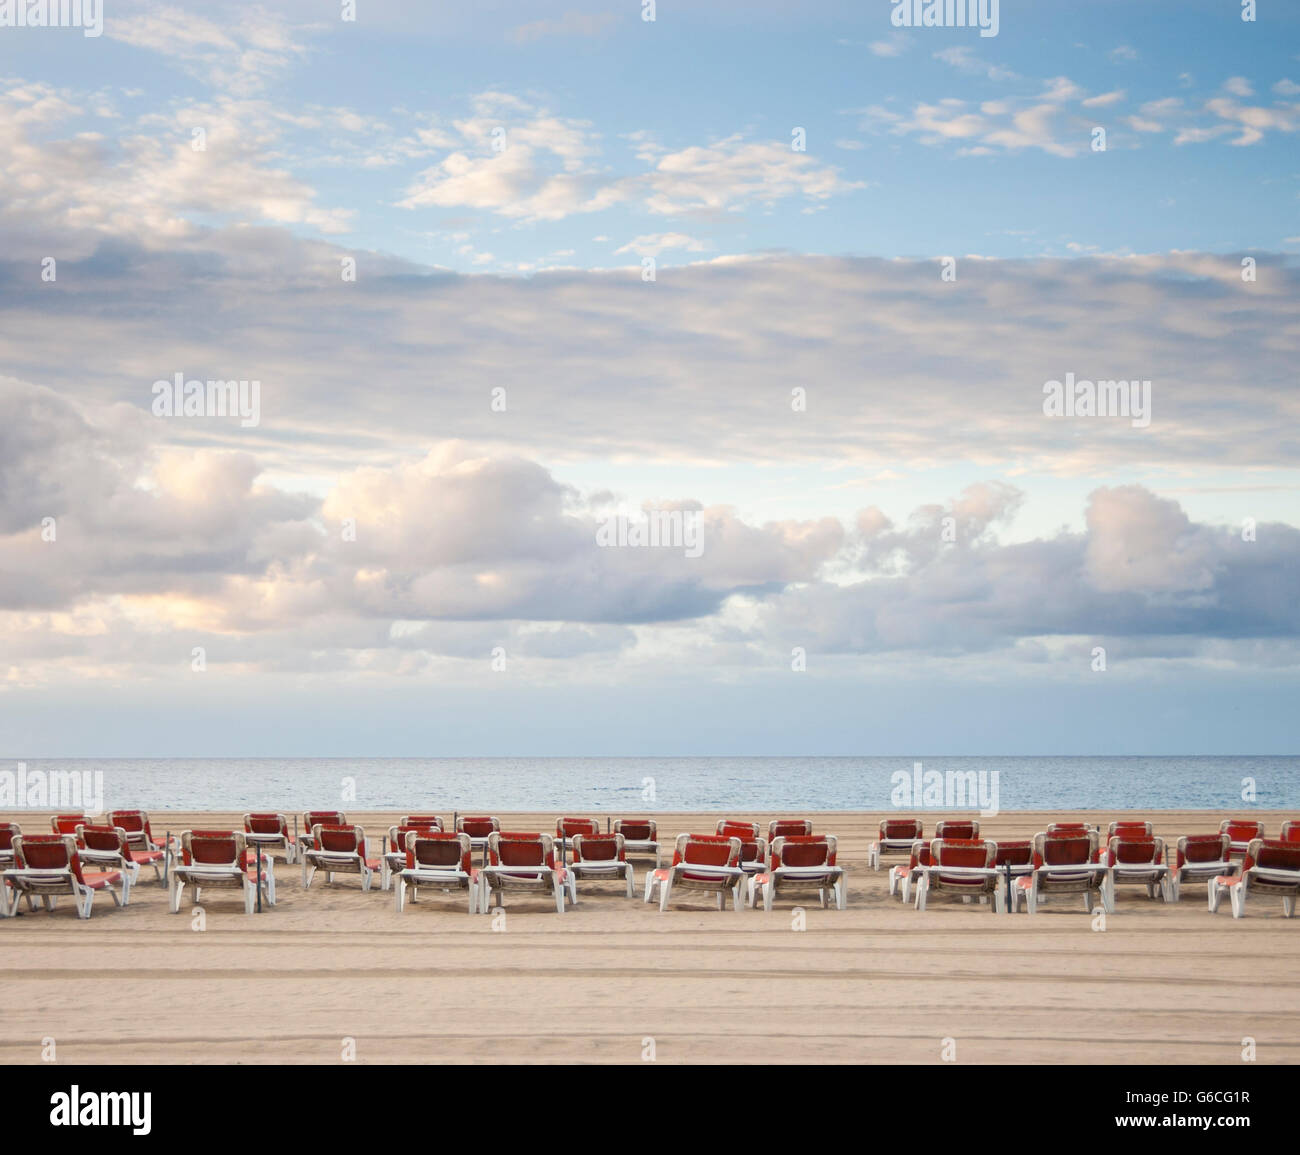 Empty sunloungers on beach in Spain. Stock Photo